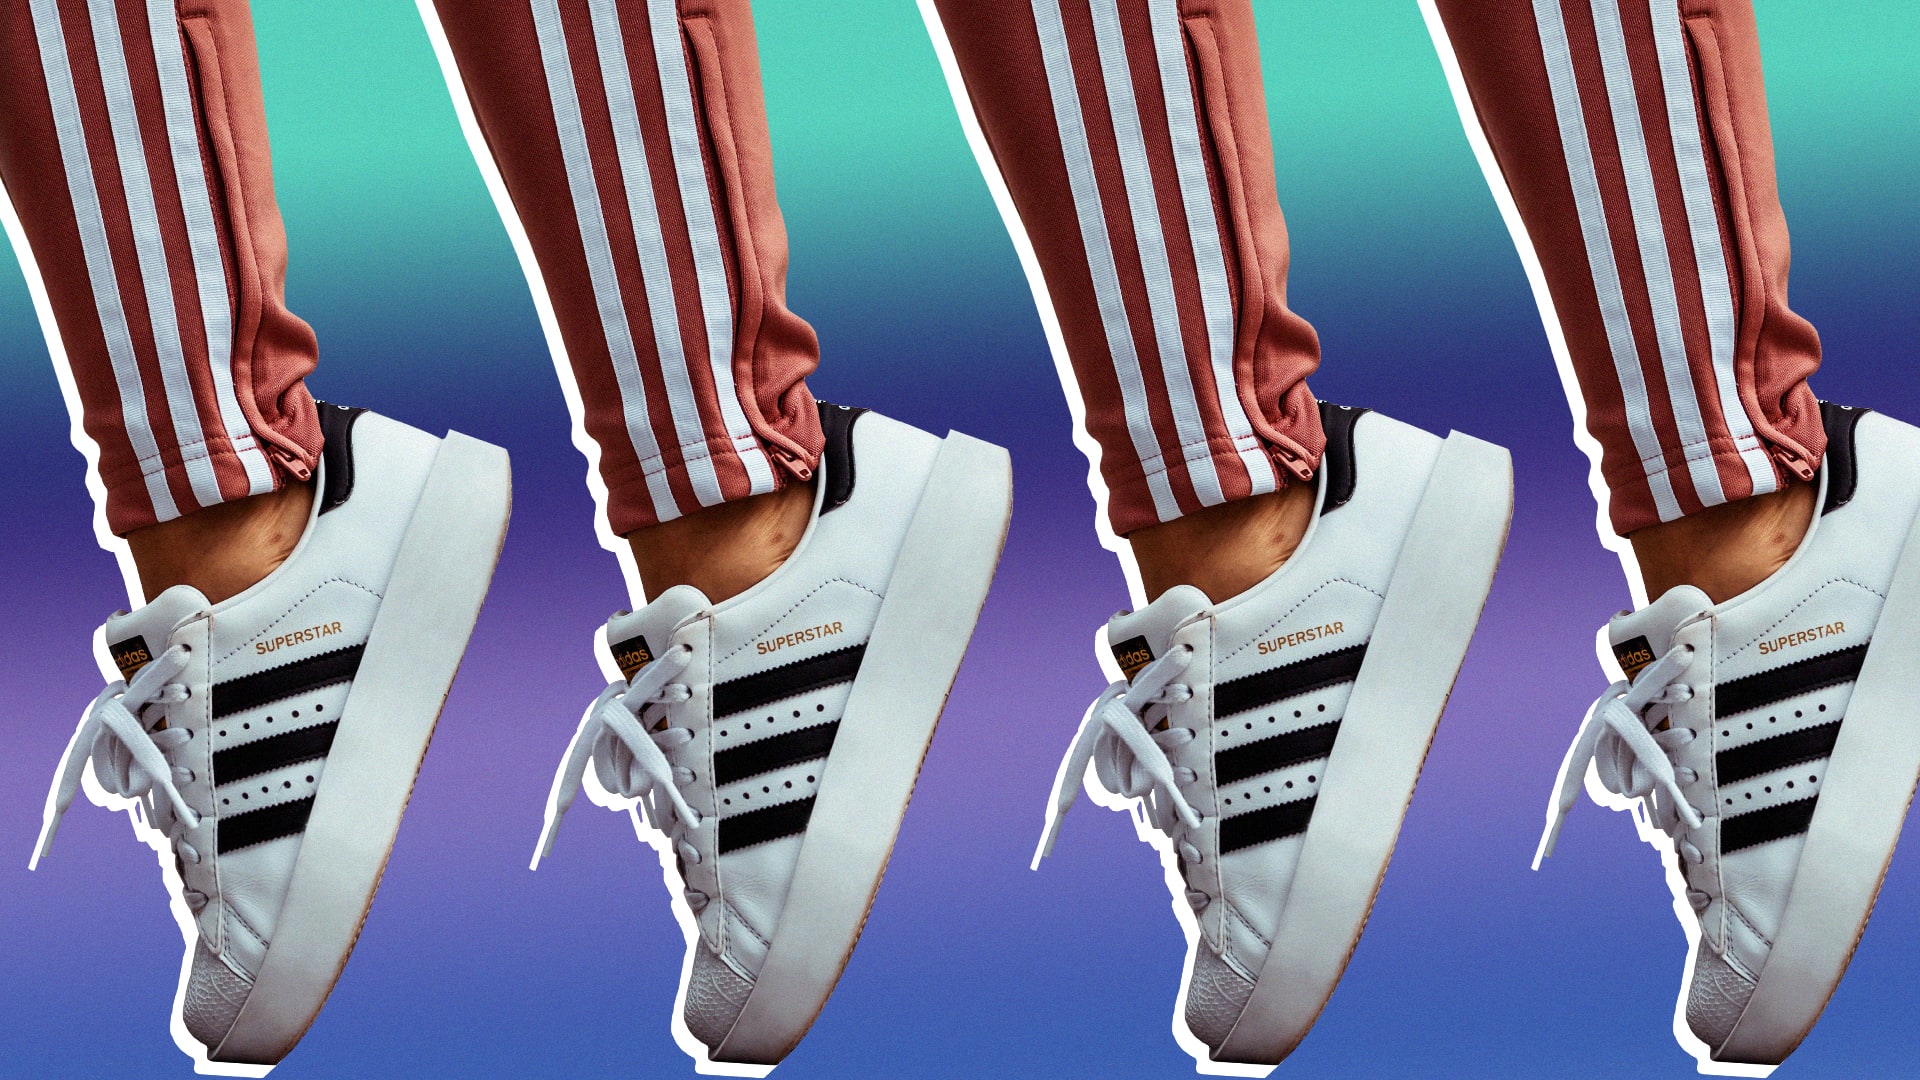 The next phase of retail: Adidas is turning influencers into sneaker salespeople